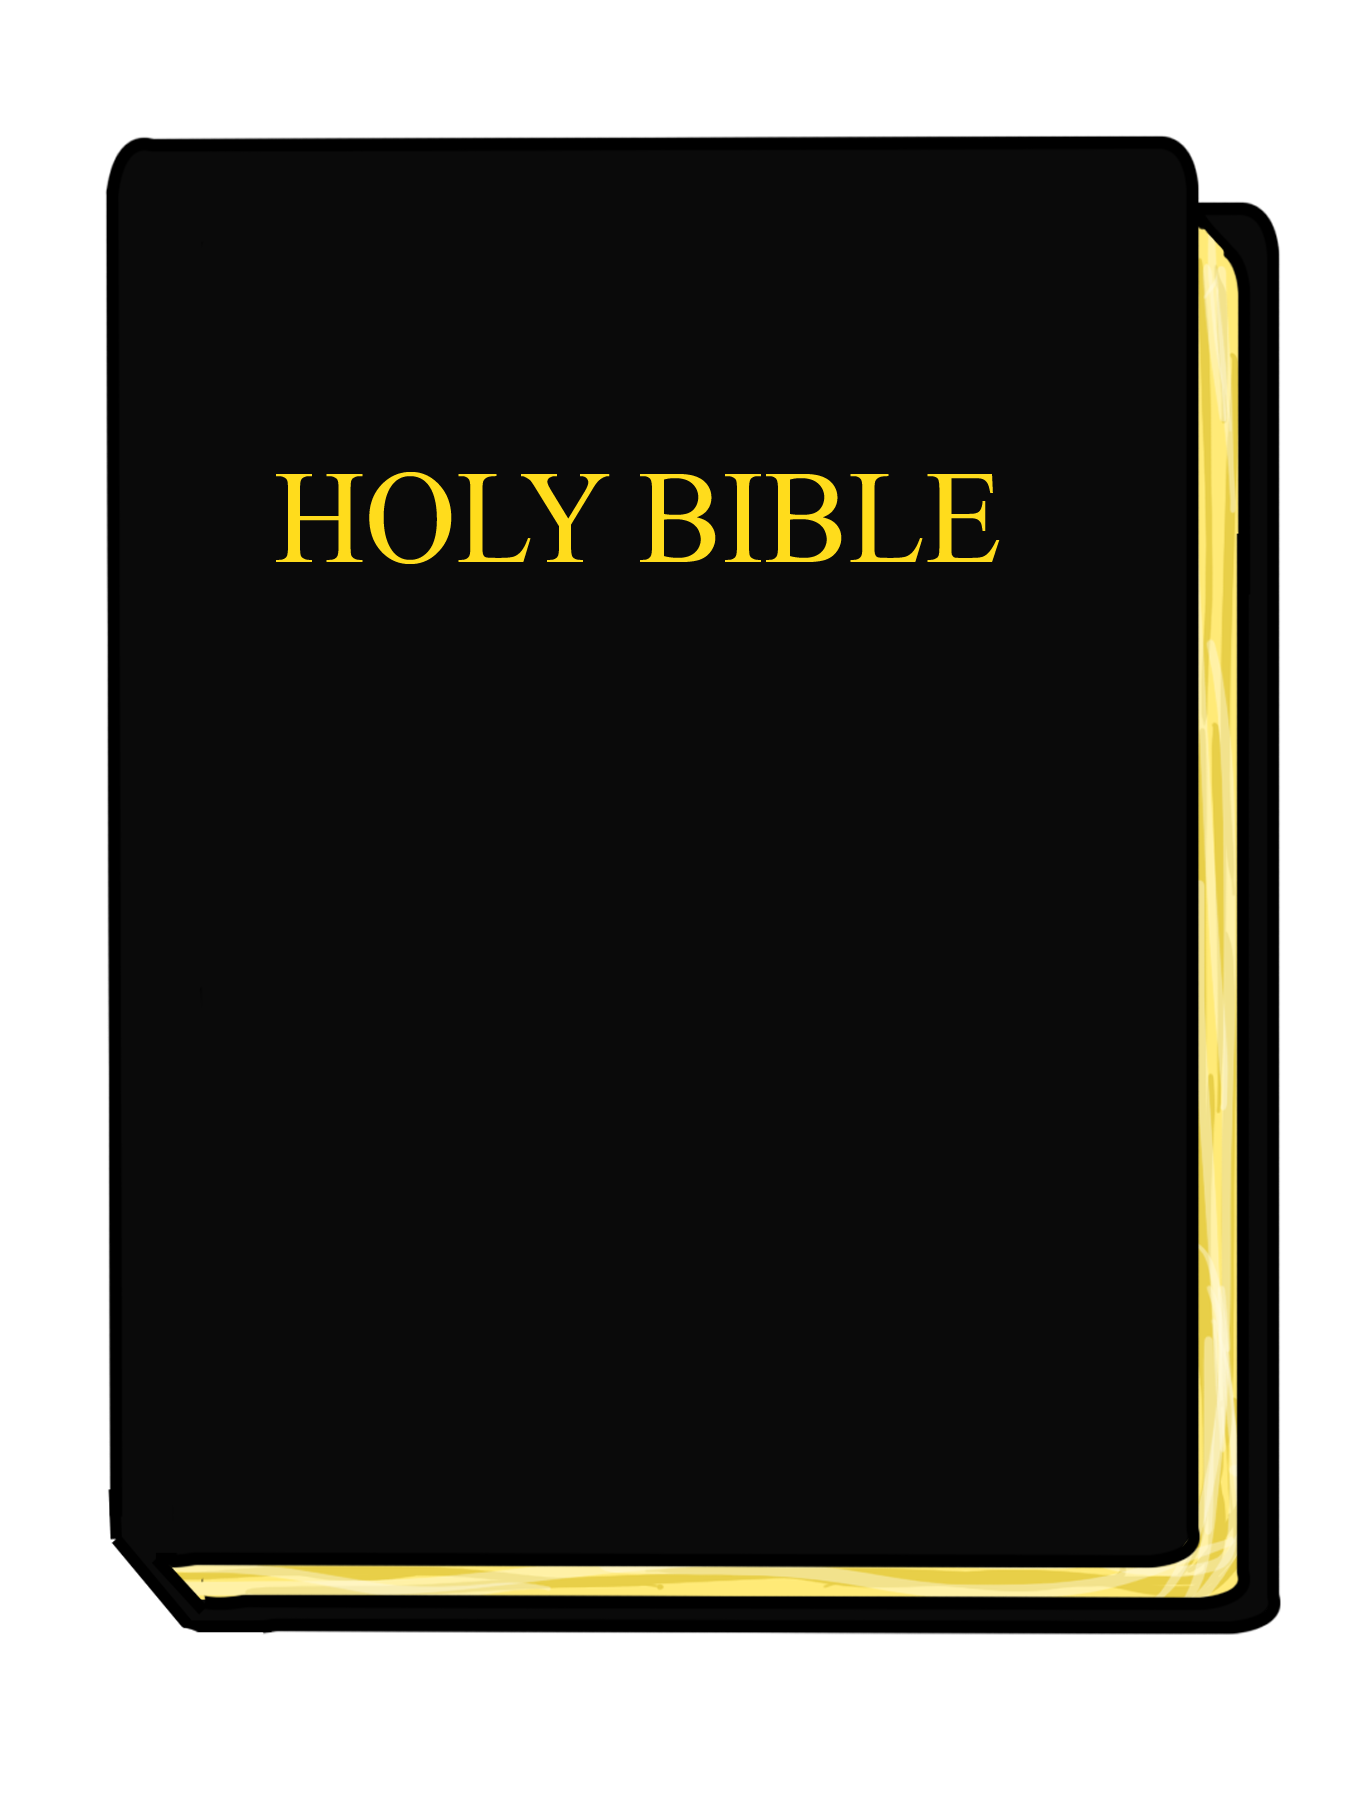 Free clipart bible. To use public domain